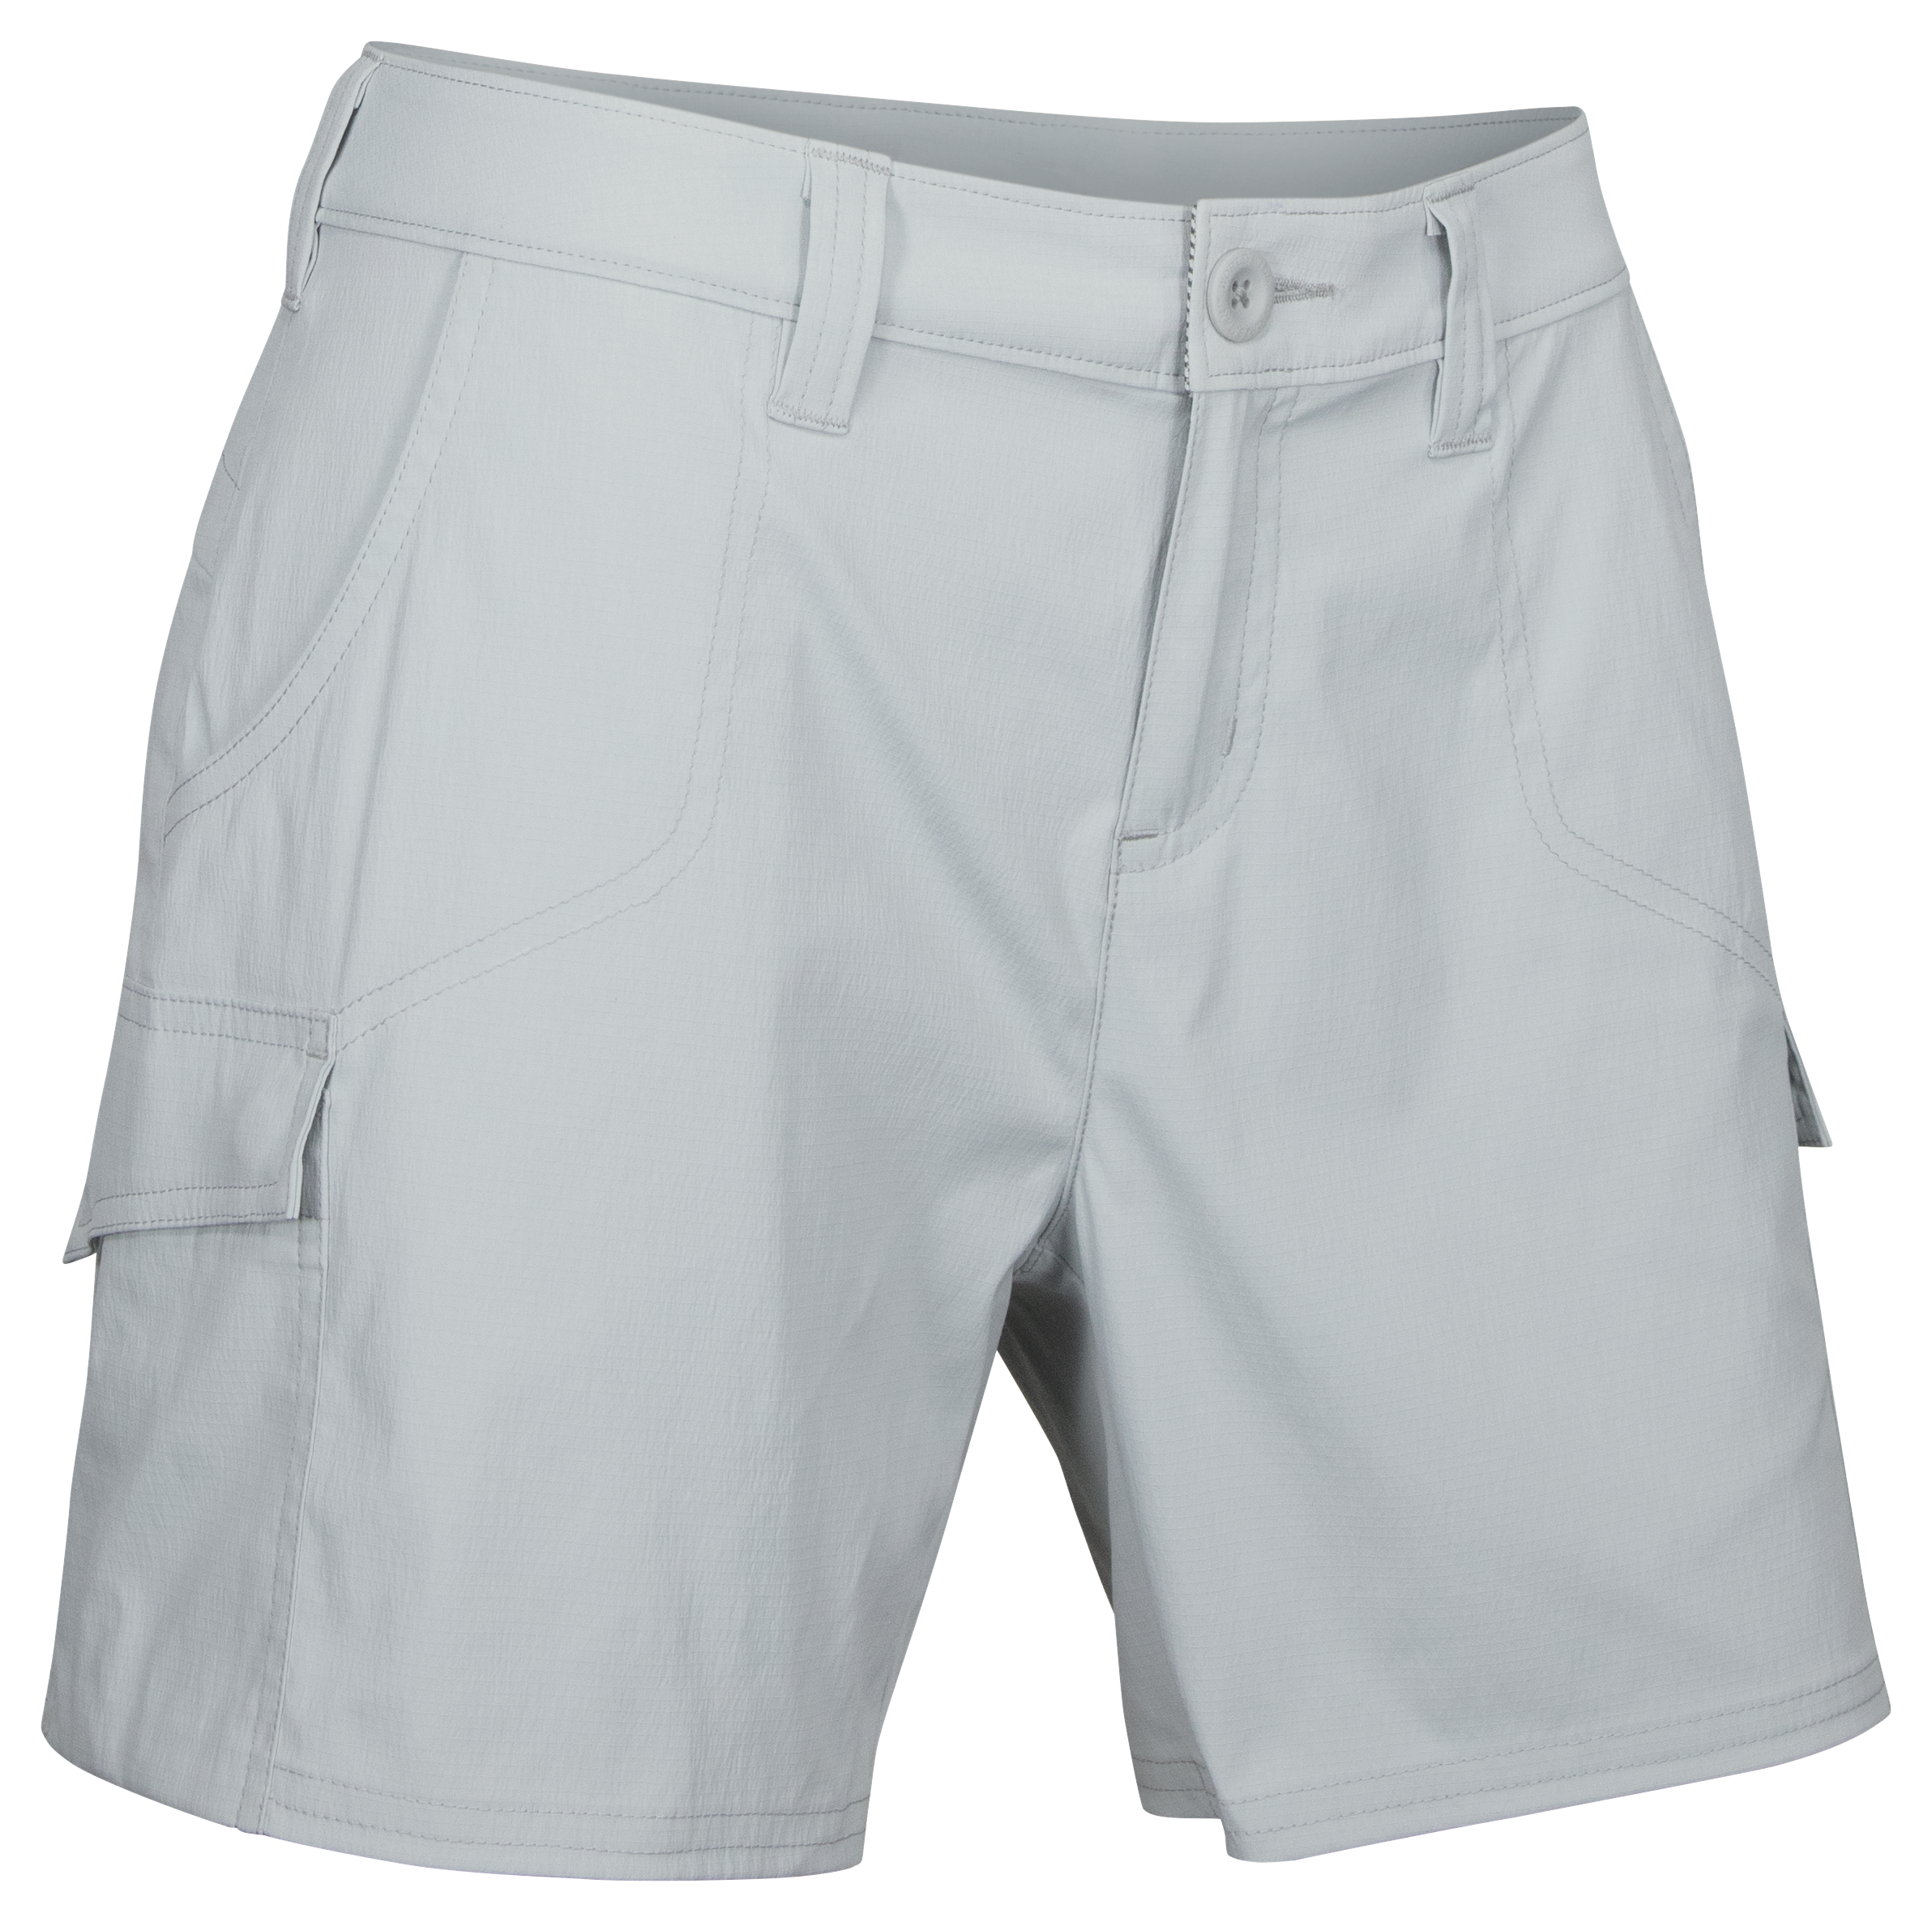 World Wide Sportsman Ripstop Cargo Shorts for Ladies - High Rise-20 - 4